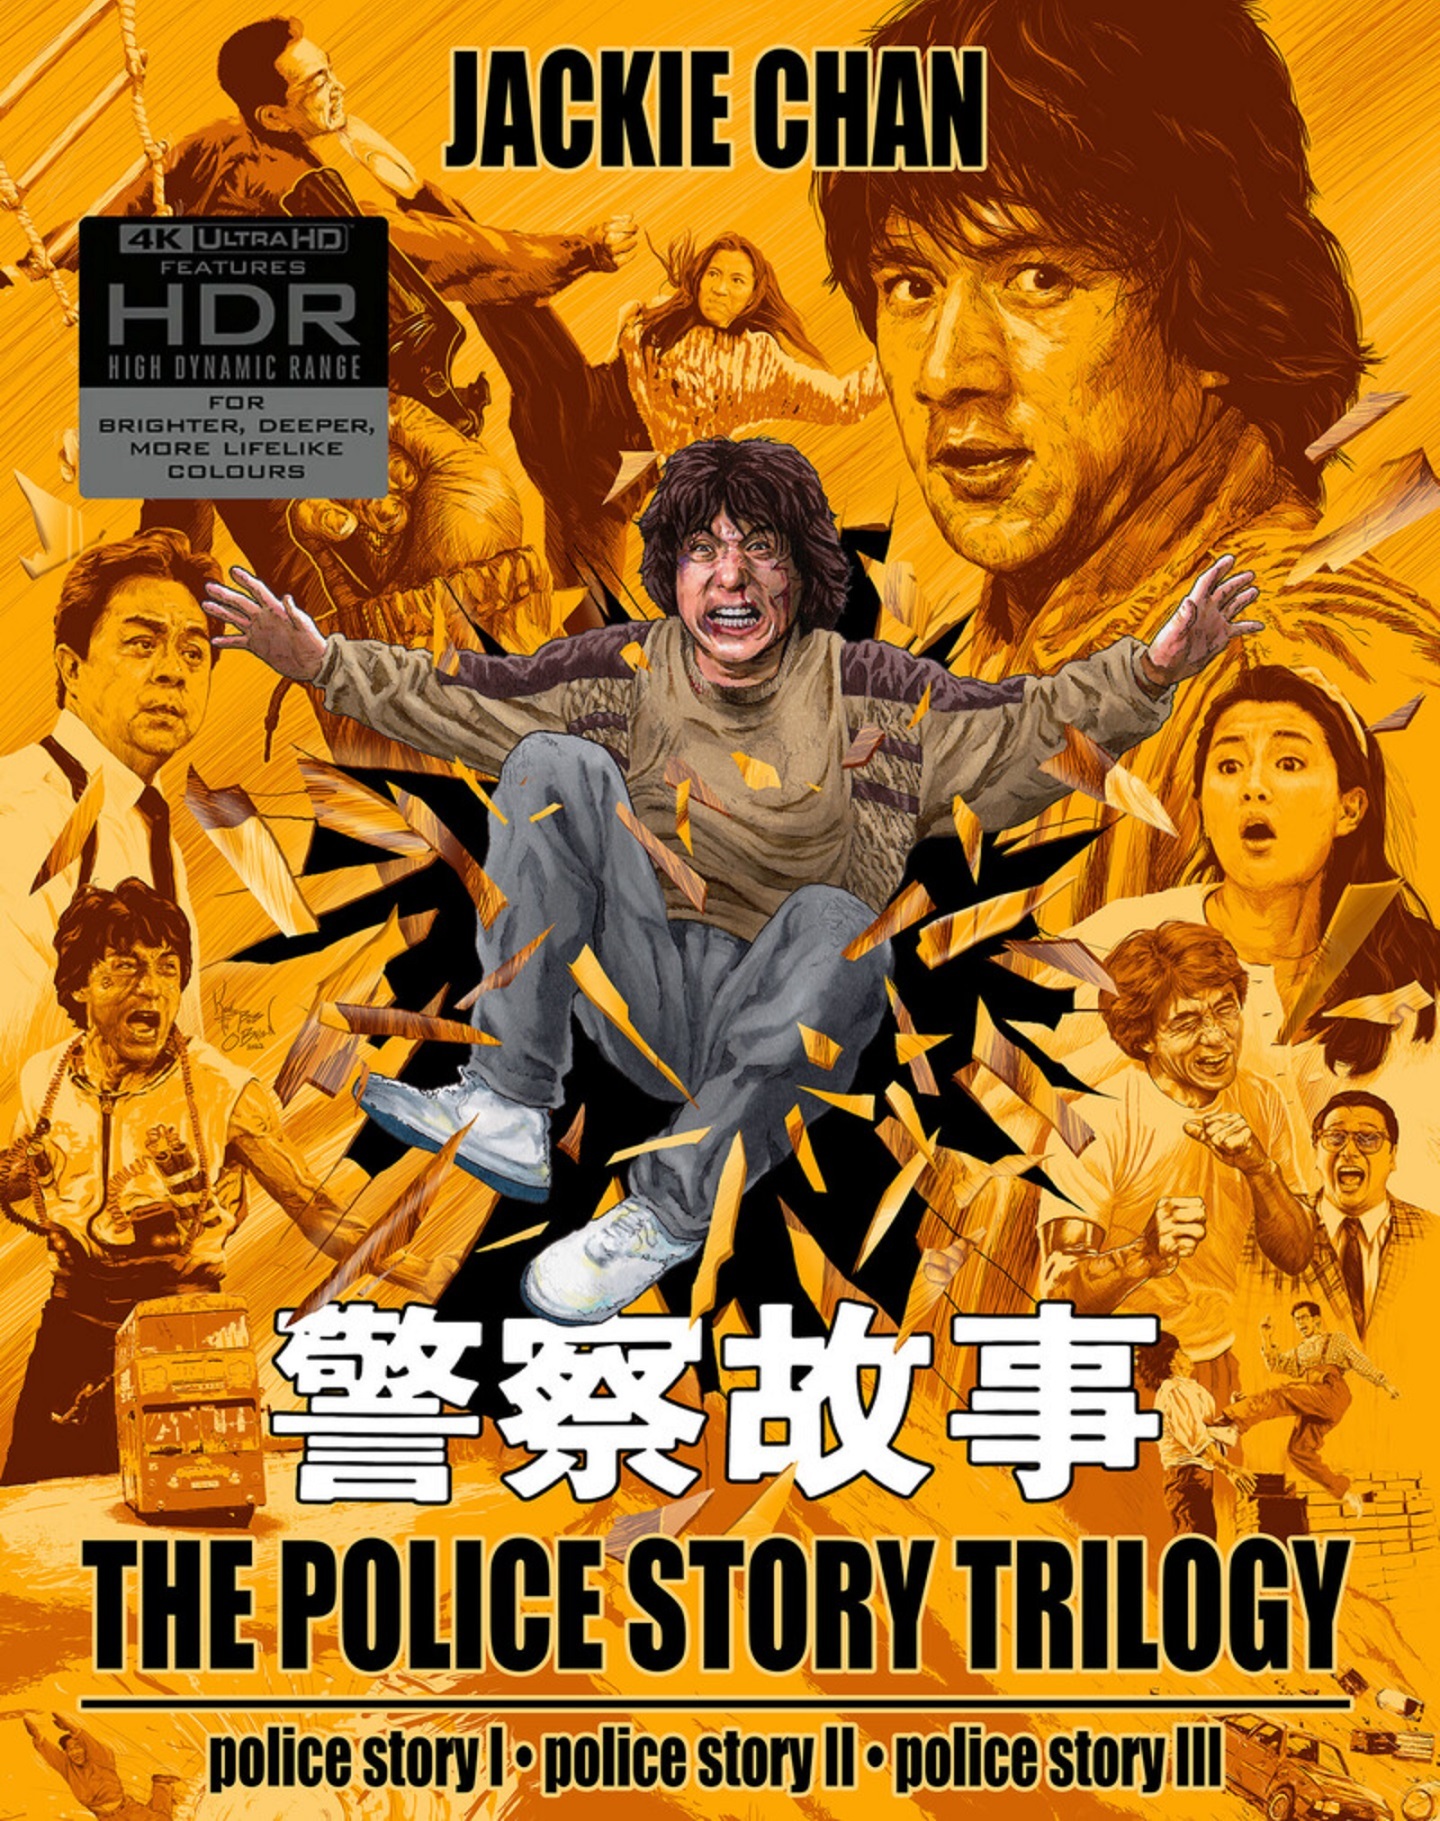 Eureka Entertainment: First Look at New Restoration of Police Story 3